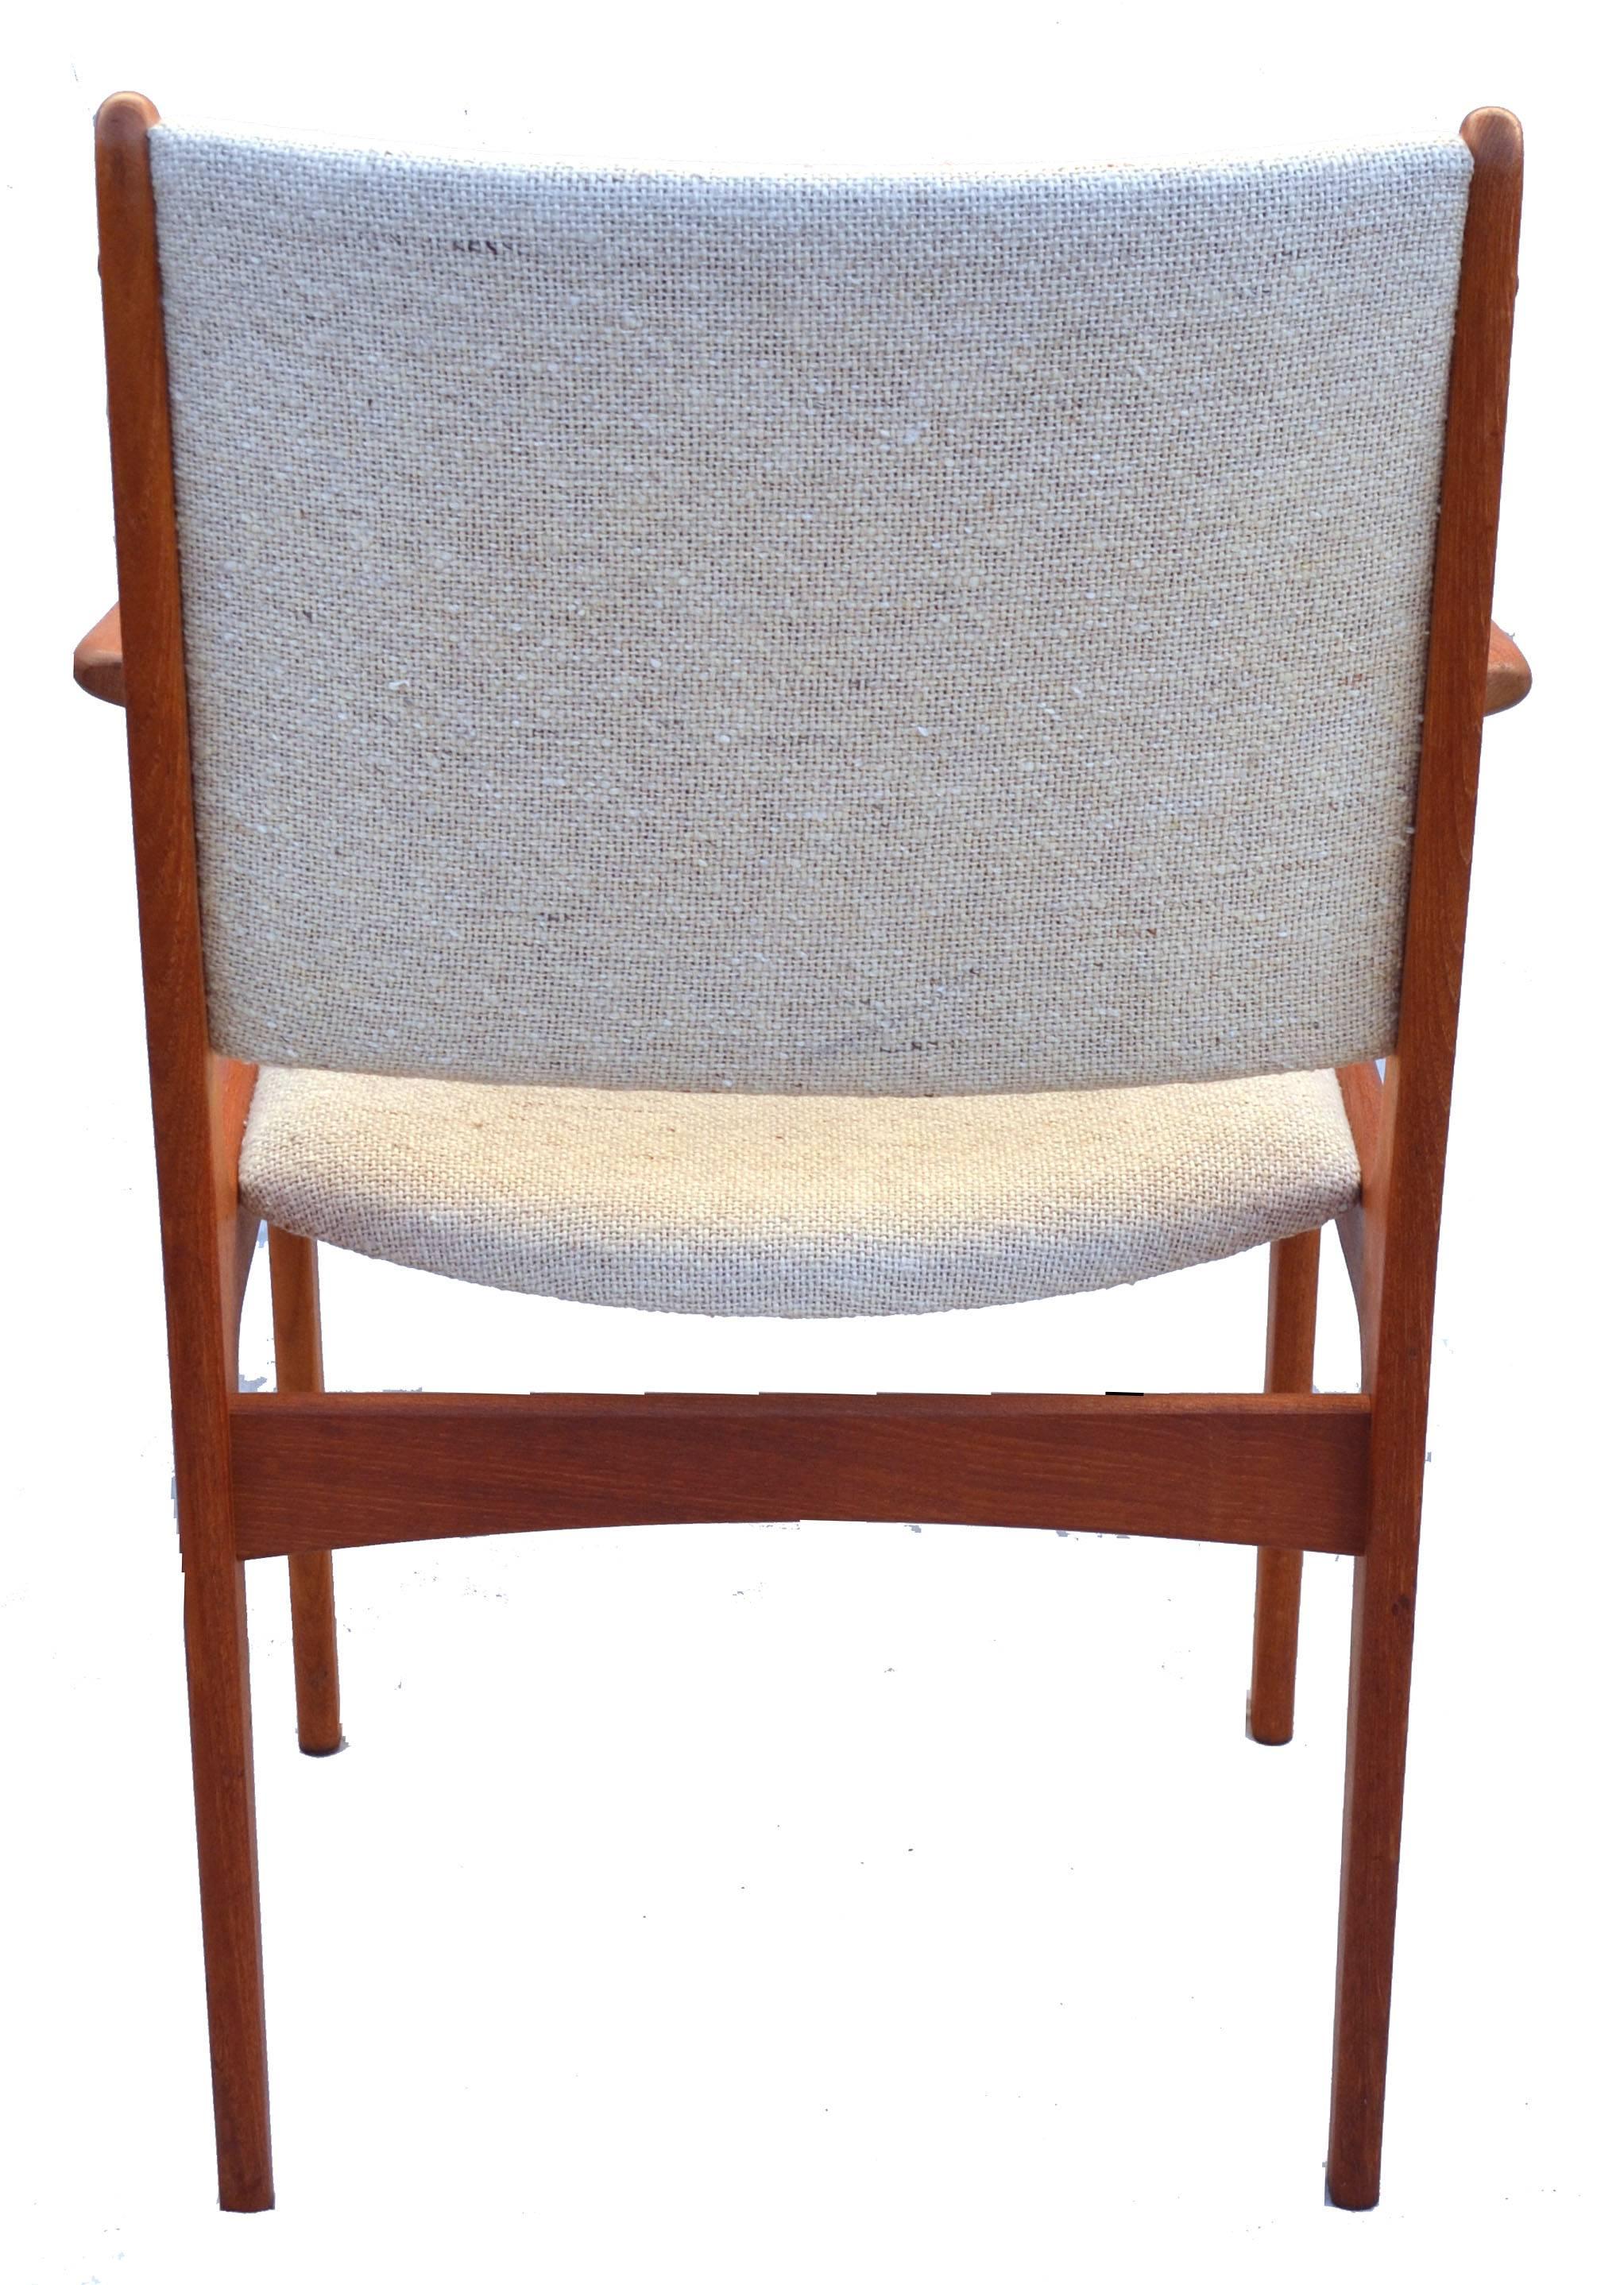 Hand-Crafted Danish Modern Chair D-Scan